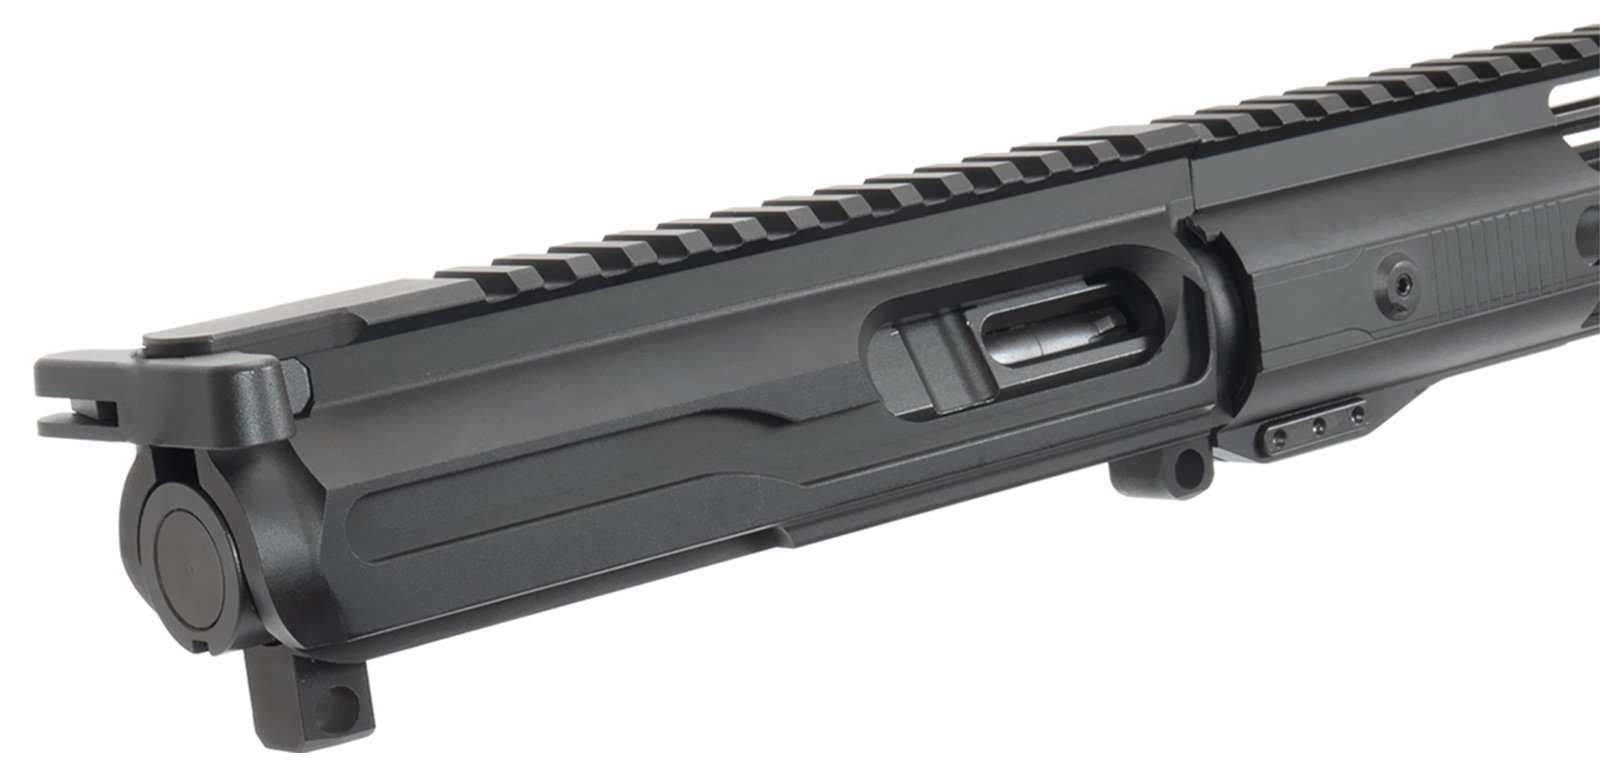 ar-15-complete-upper-assembly-16-9mm-1-10-12-hera-arms-unmarked-keymod-ar-1...